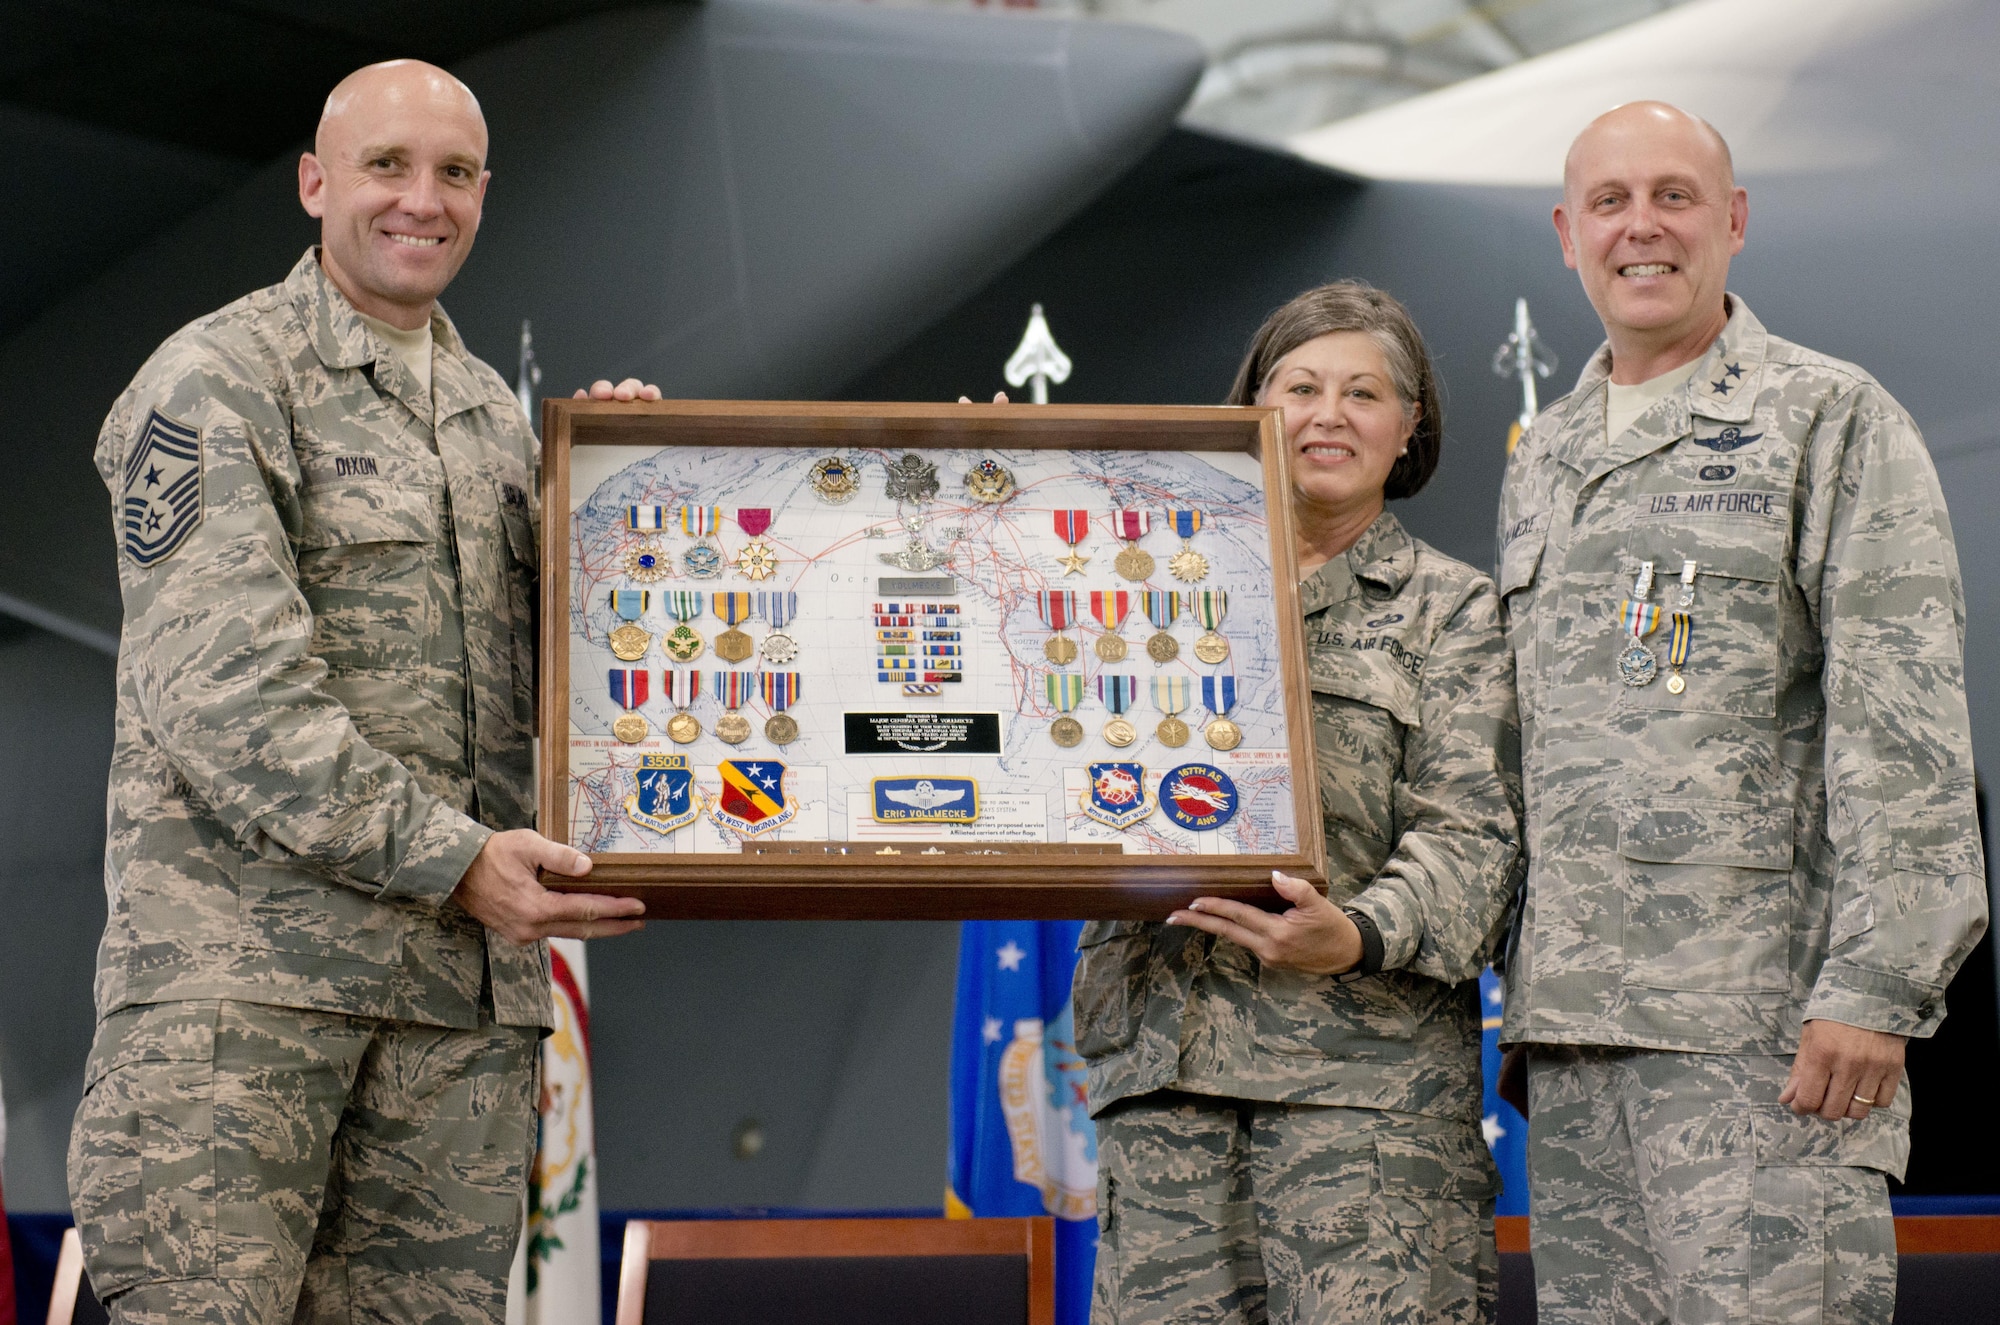 West Virginia Air National Guard Command Chief, Chief Master Sgt. James Dixon and Brig. Gen. Paige Hunter, Assistant Adjutant General, West Virginia Air National Guard, present Maj. Gen. Eric Vollmecke with a shadow box during his retirement ceremony at the 167th Airlift Wing, Martinsburg, W.Va., Sept. 16.